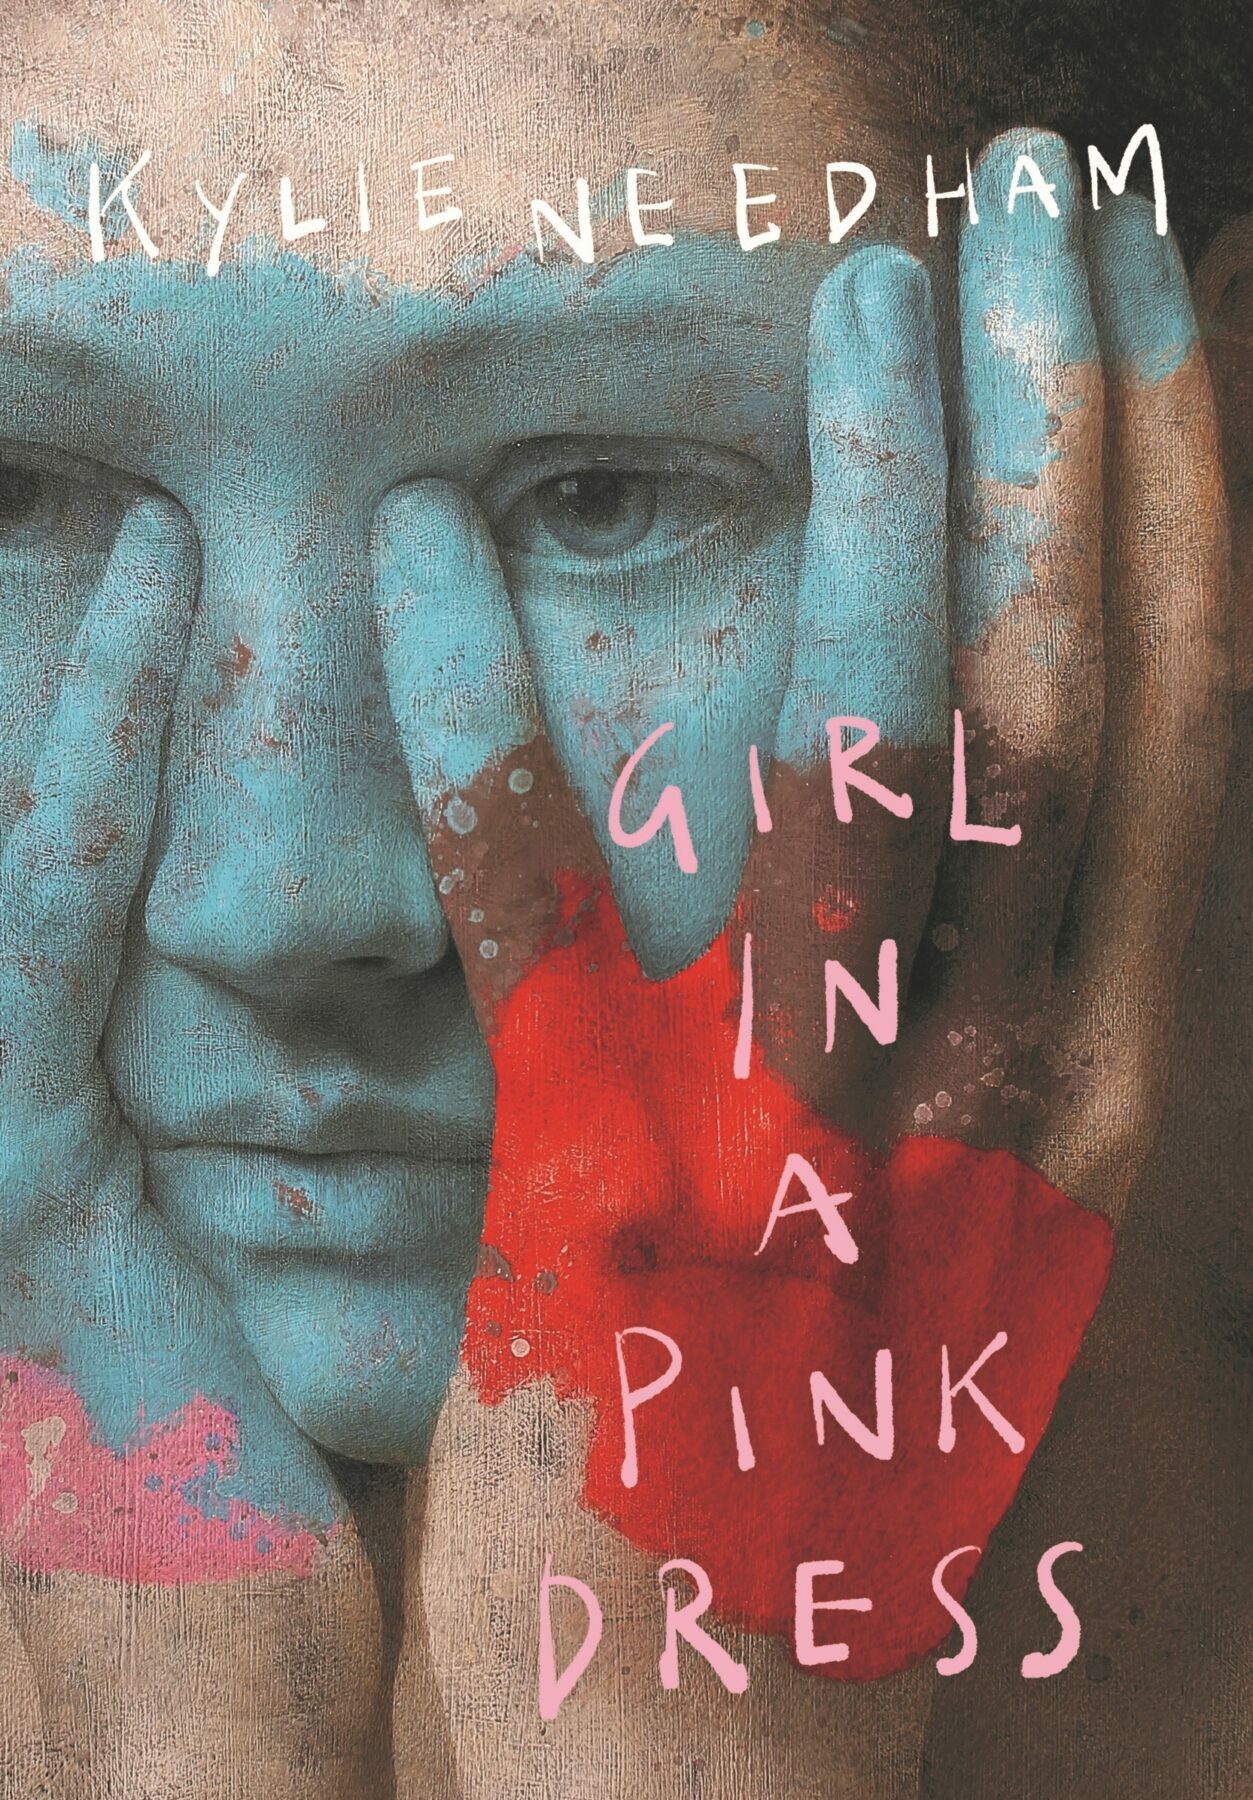 A book cover featuring a close-up photograph of a young woman with her hands over her face and the title in pink handwriting-style lettering over the top of one hand